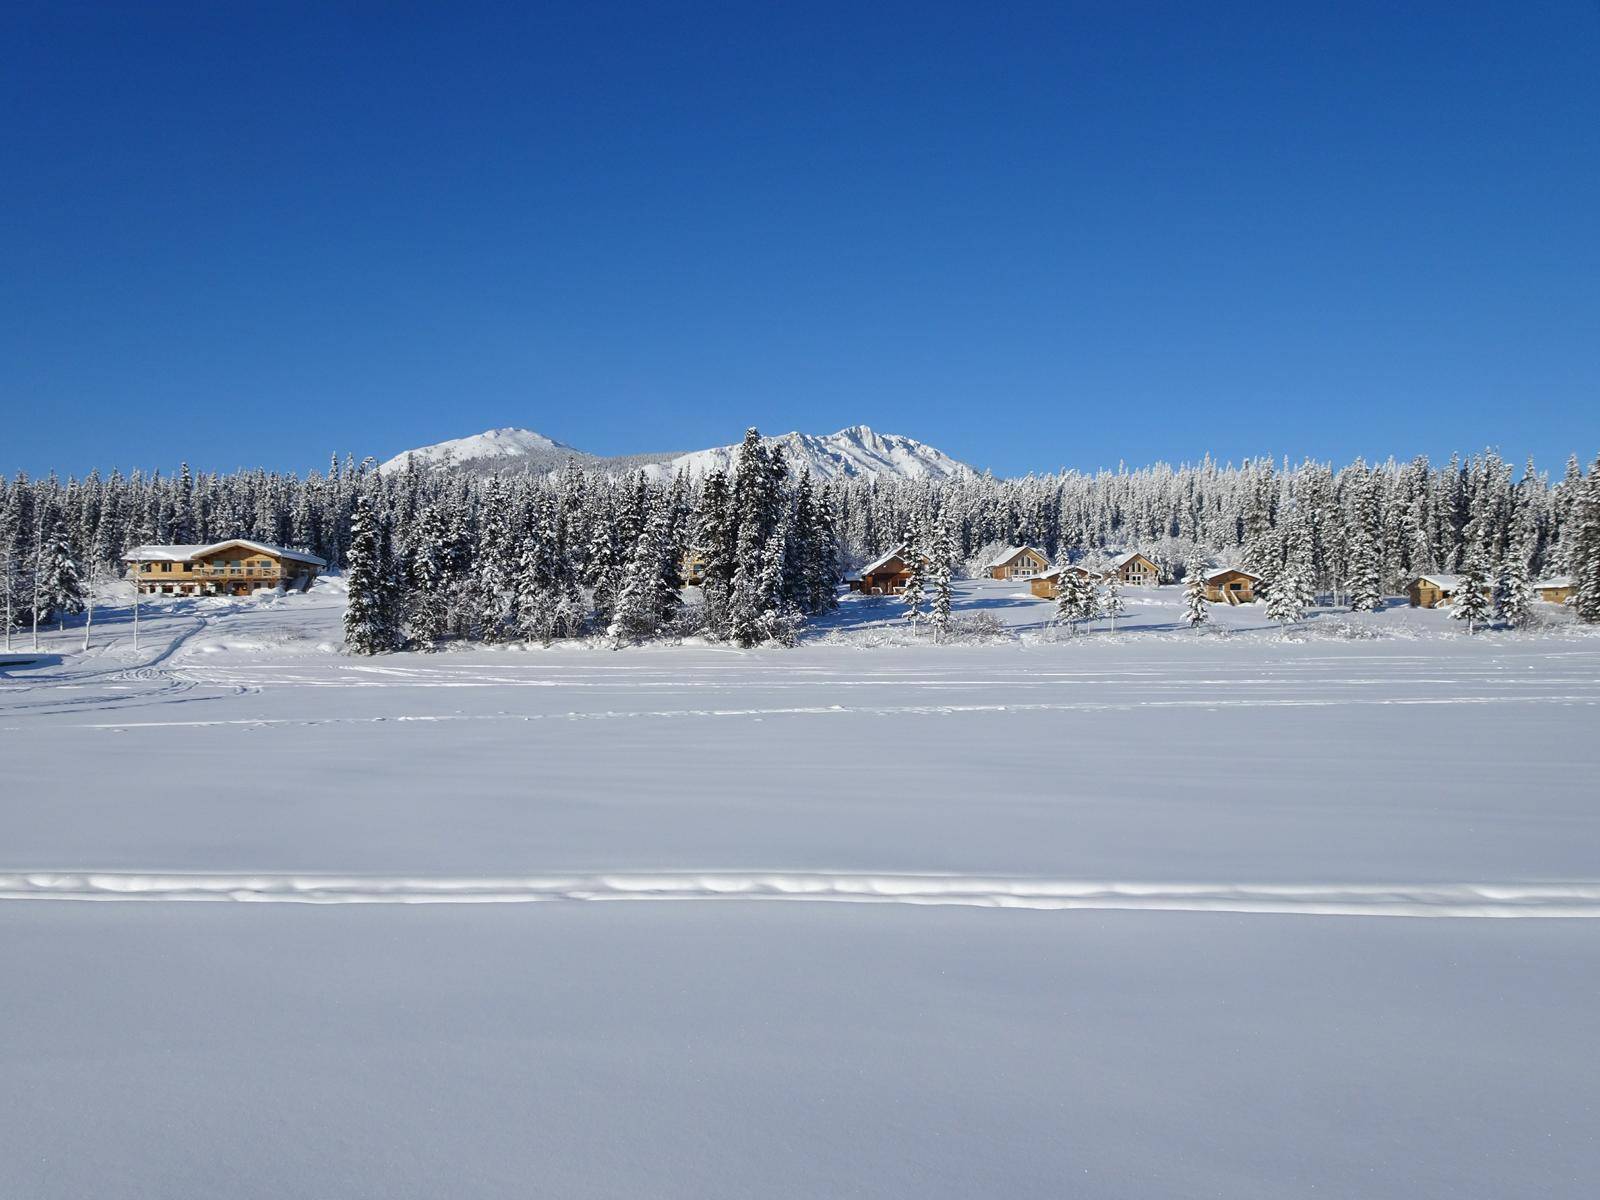 View from the frozen lake to the property and mountains in deep winter